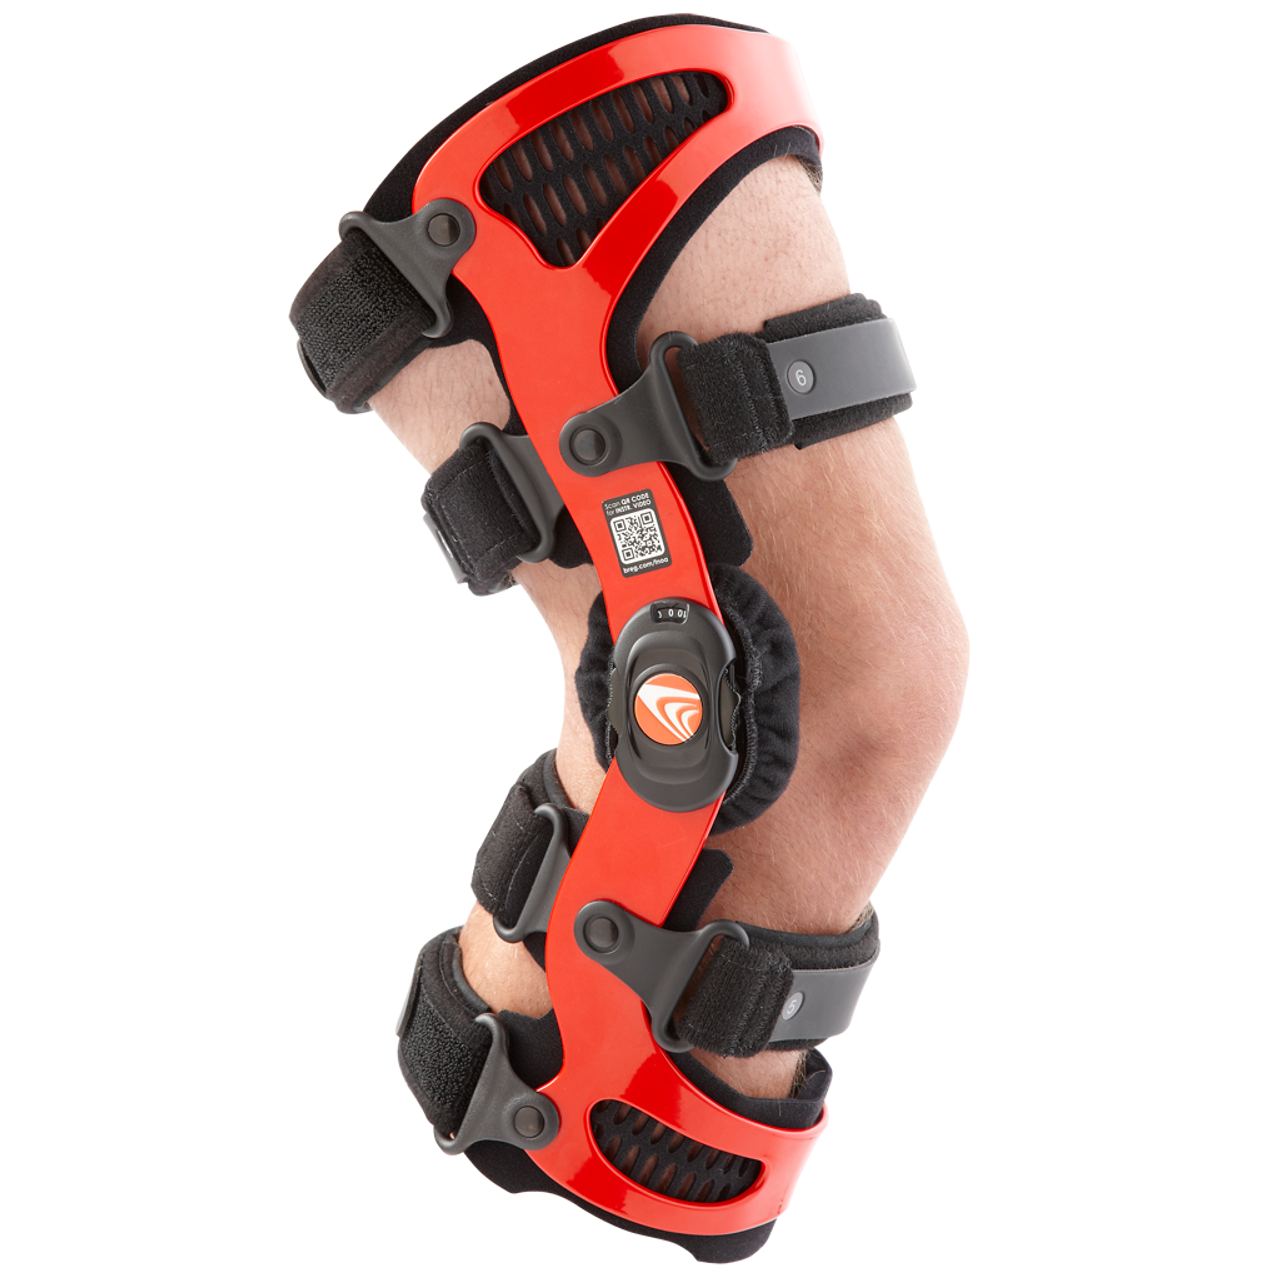 Breg Solus Plus Knee Brace - Shop Our Top-Notch Physical Therapy Products